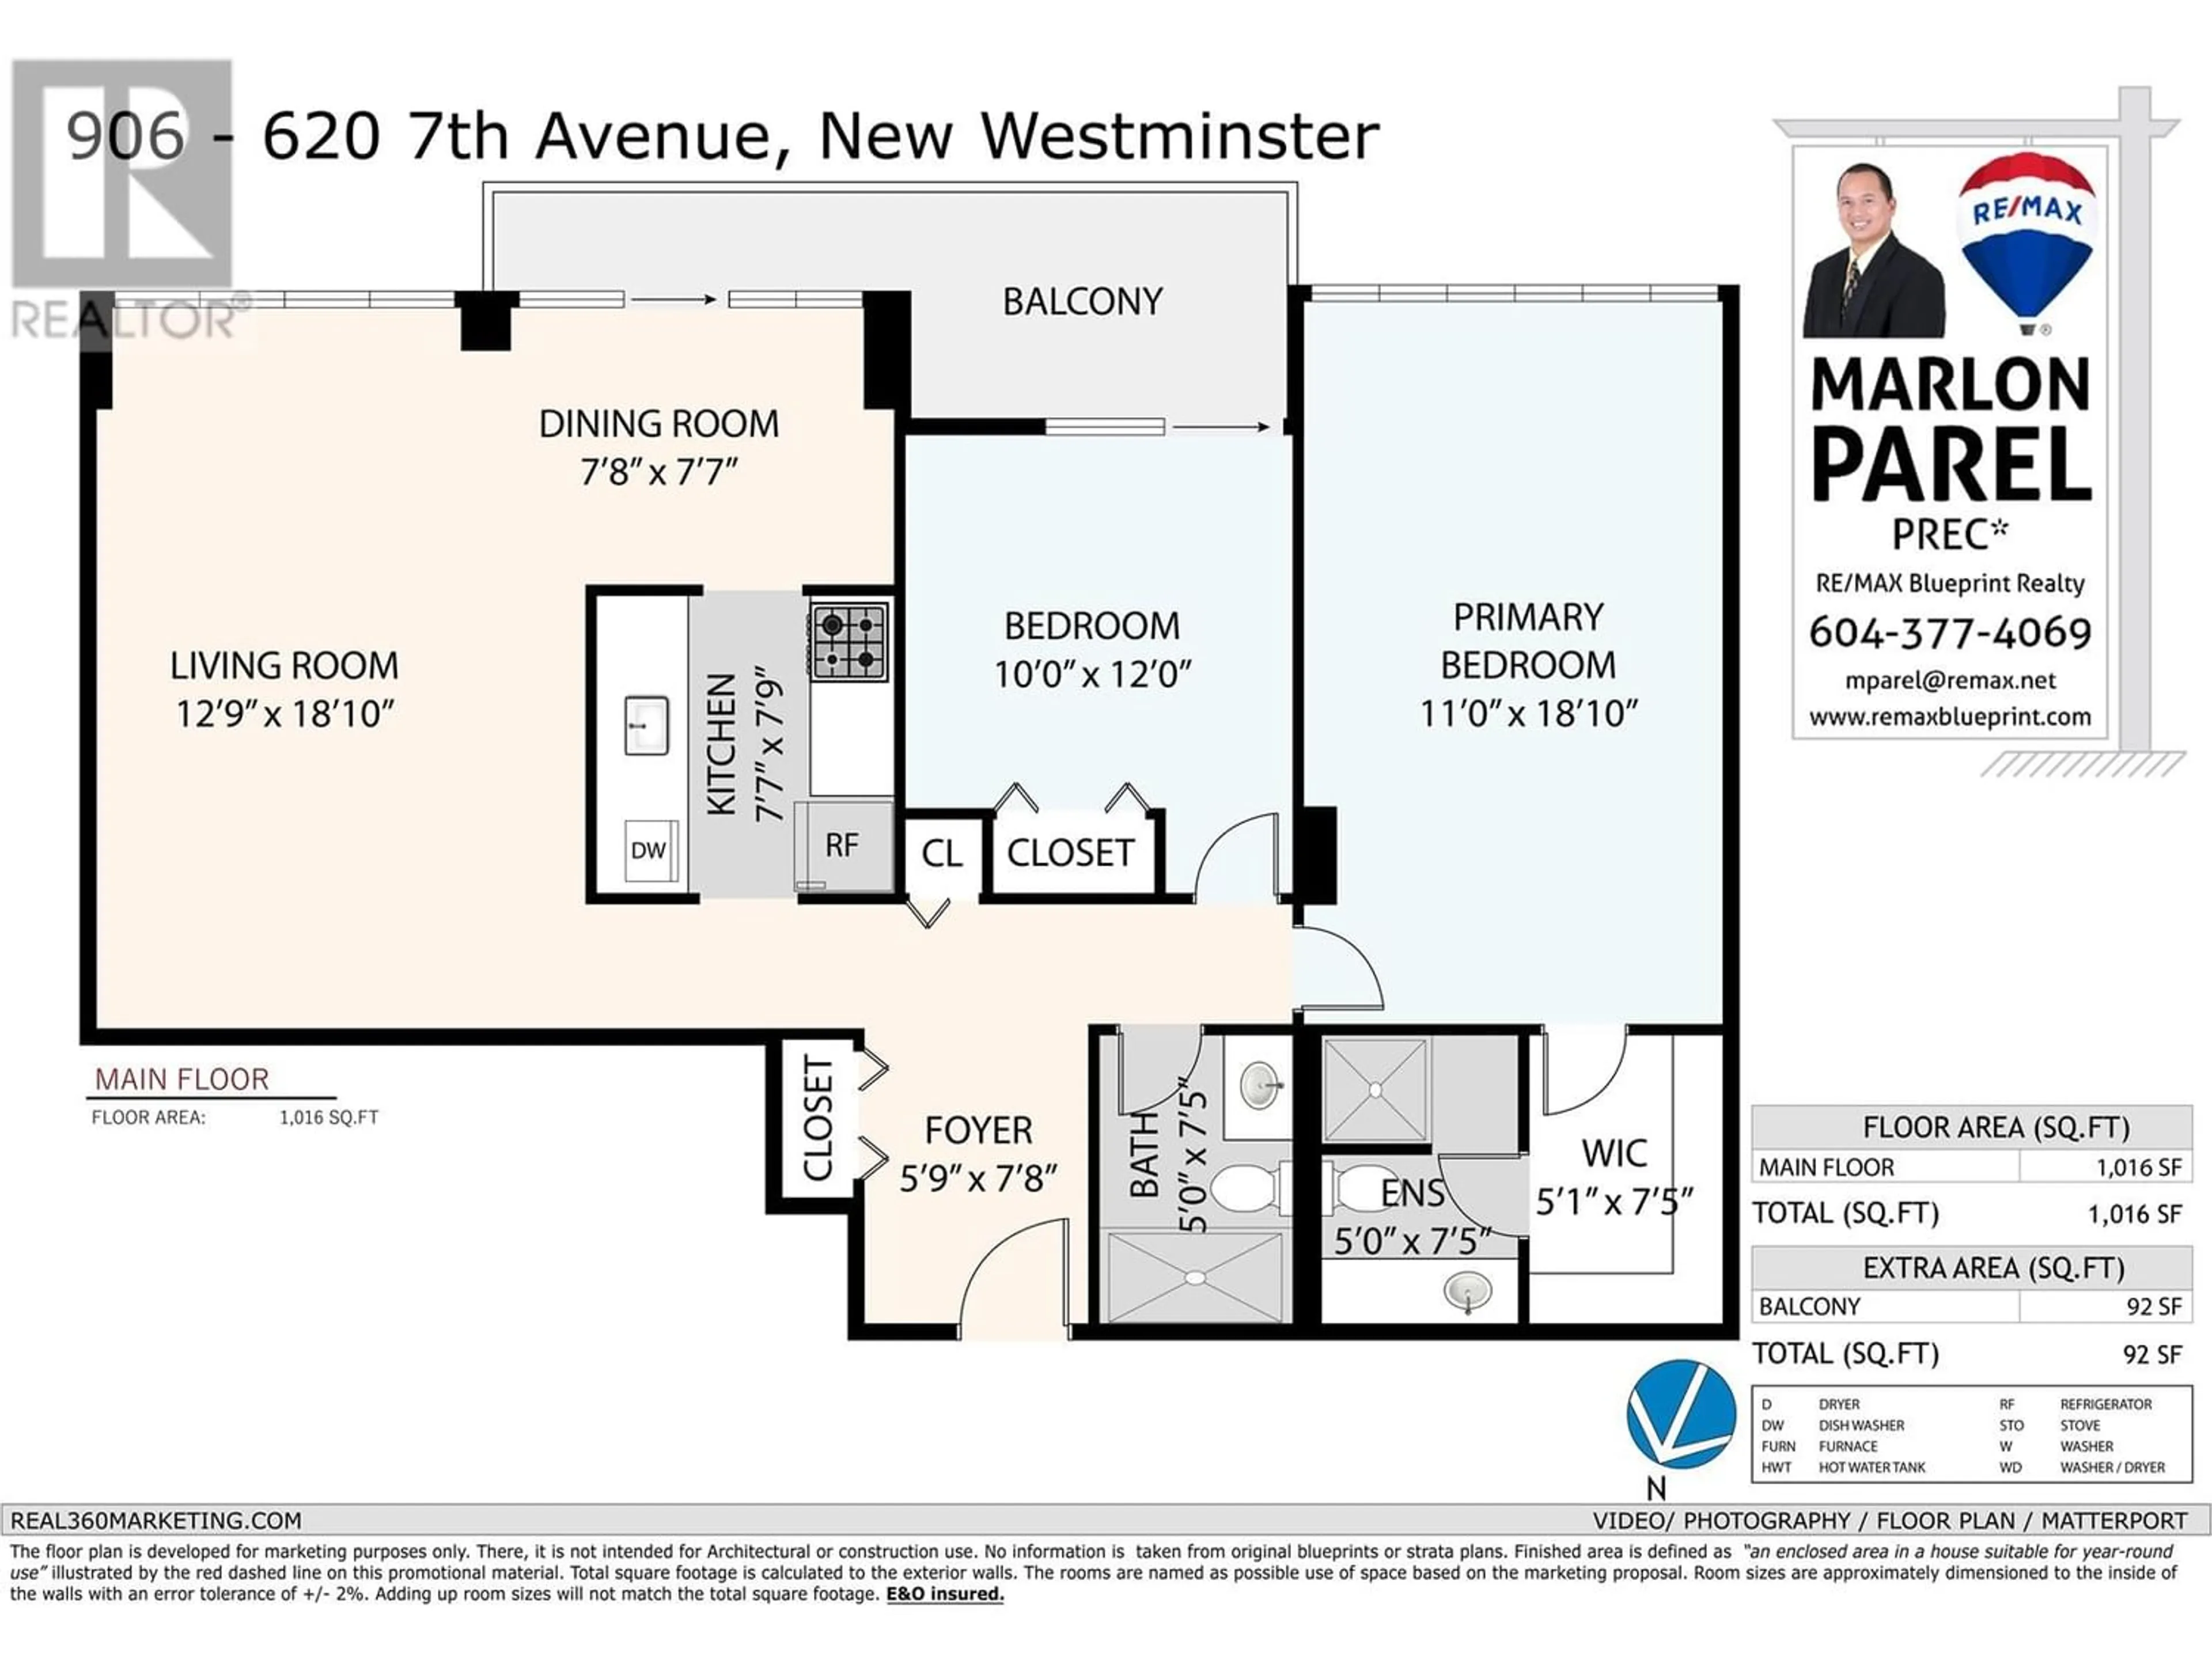 Floor plan for 906 620 SEVENTH AVE AVENUE, New Westminster British Columbia V3M5T6